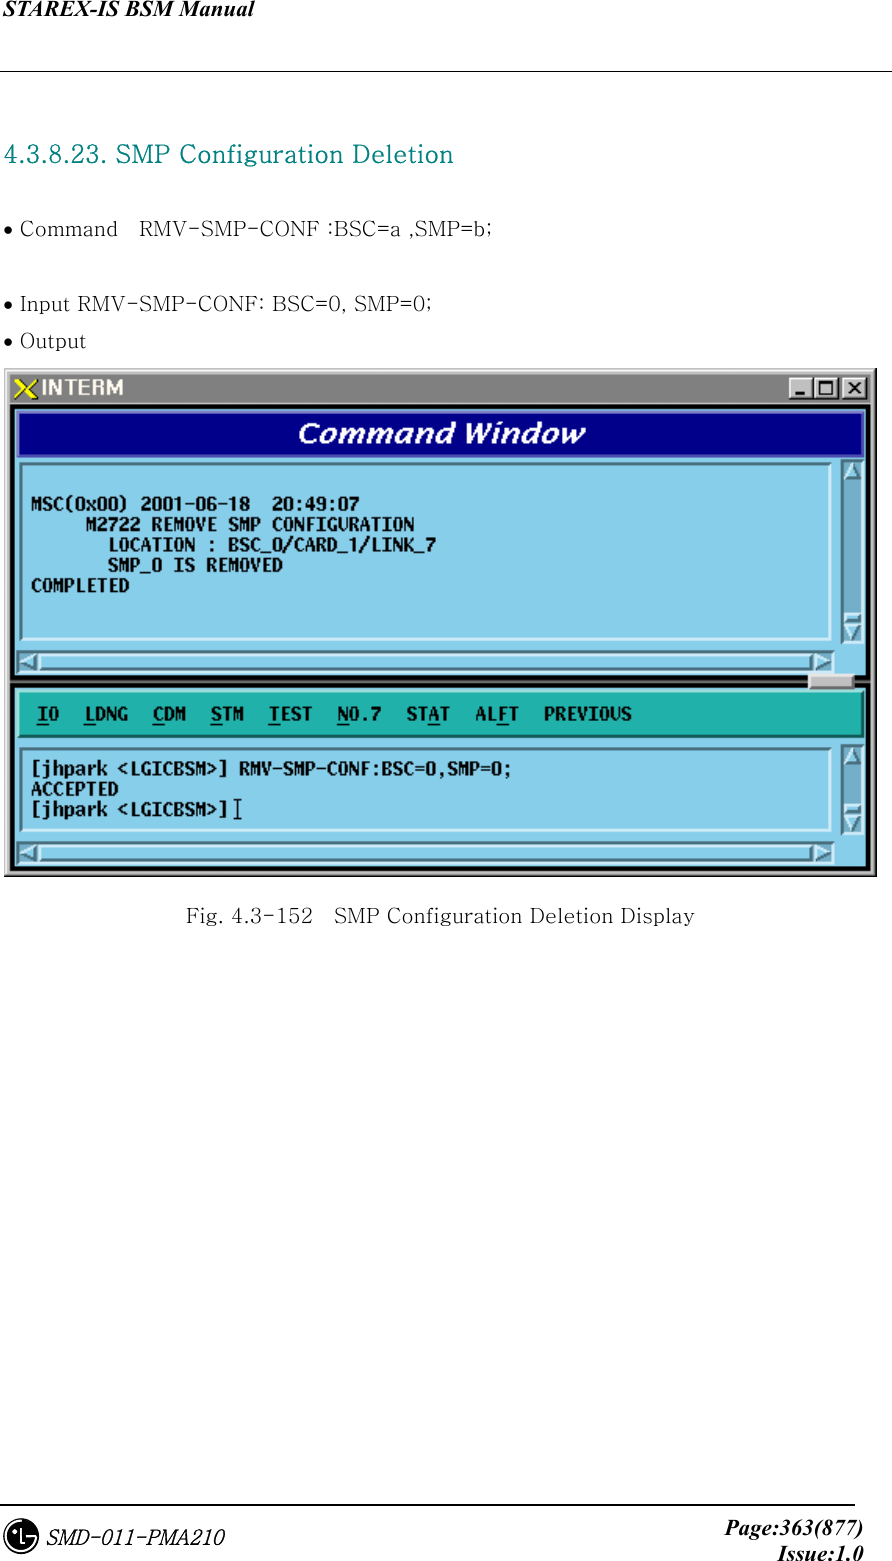 STAREX-IS BSM Manual     Page:363(877)Issue:1.0SMD-011-PMA210  4.3.8.23. SMP Configuration Deletion   • Command    RMV-SMP-CONF :BSC=a ,SMP=b;  • Input RMV-SMP-CONF: BSC=0, SMP=0; • Output  Fig. 4.3-152    SMP Configuration Deletion Display 